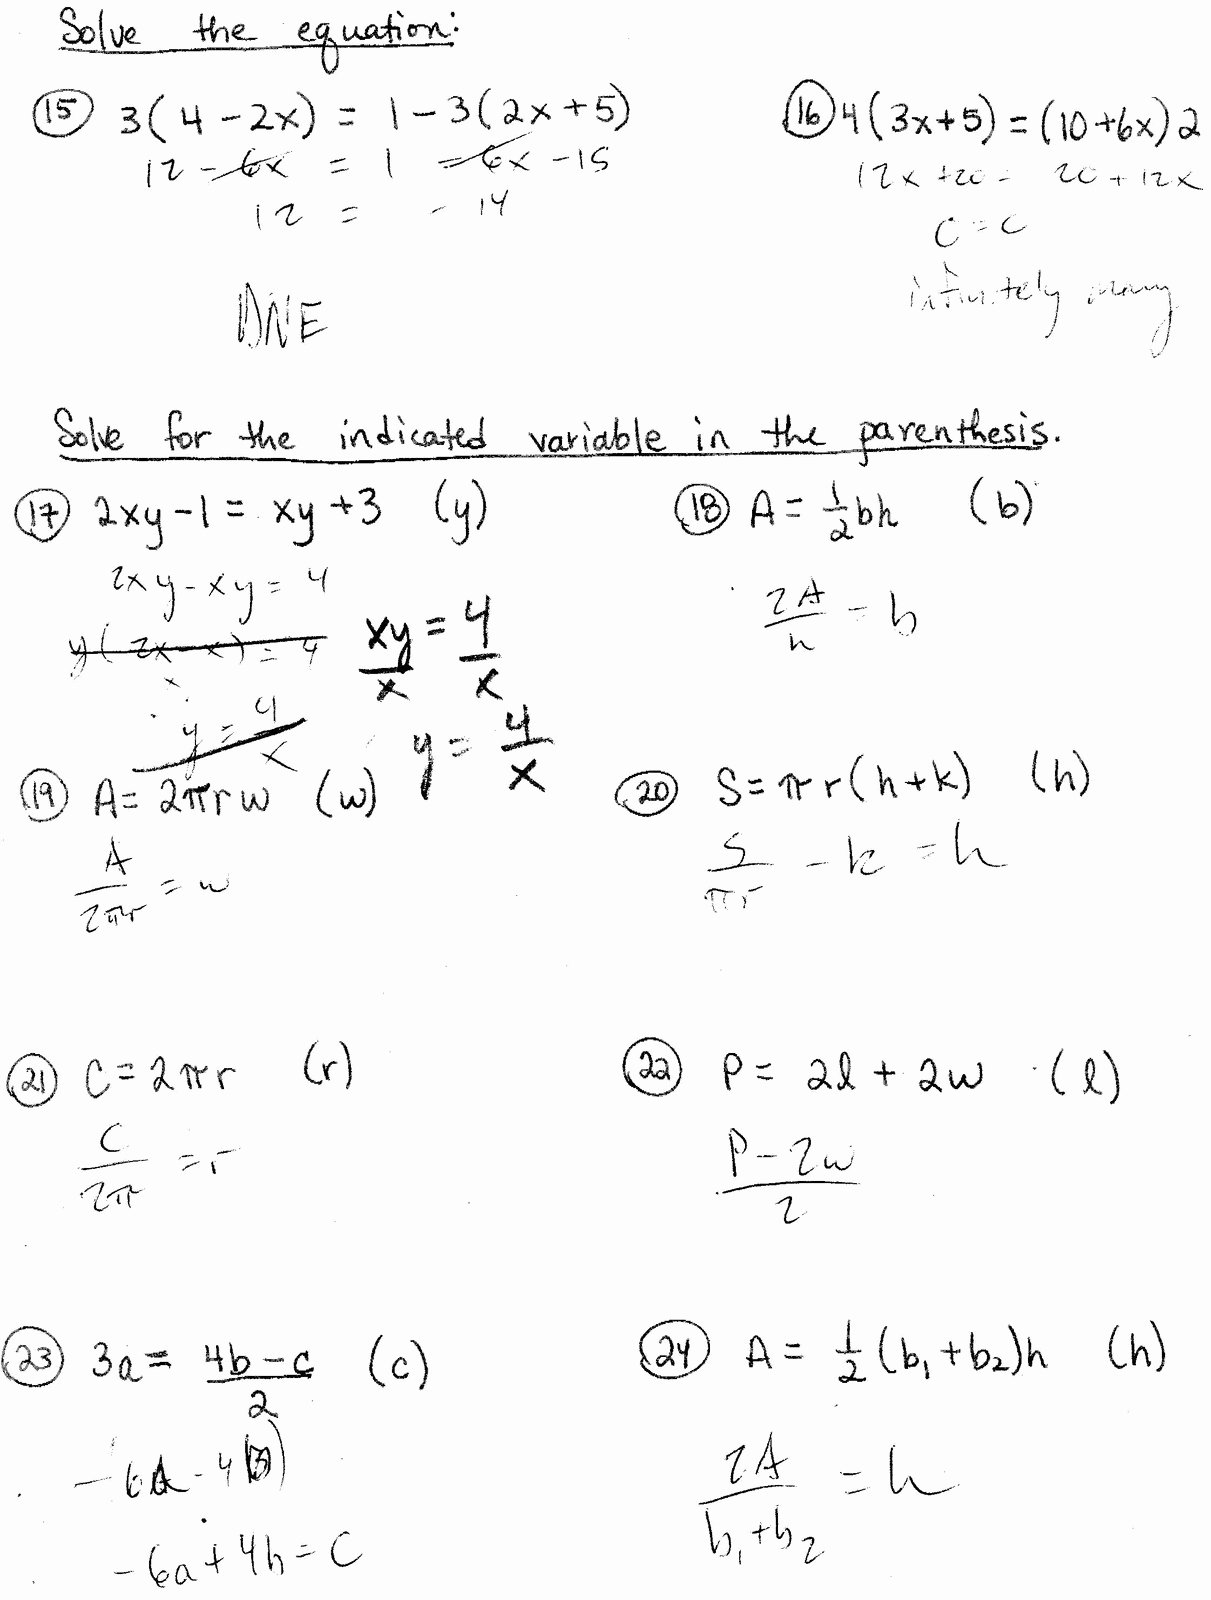 Literal Equations Worksheet Answer Beautiful Mr Suominen S Math Homepage Linear Literal Equations